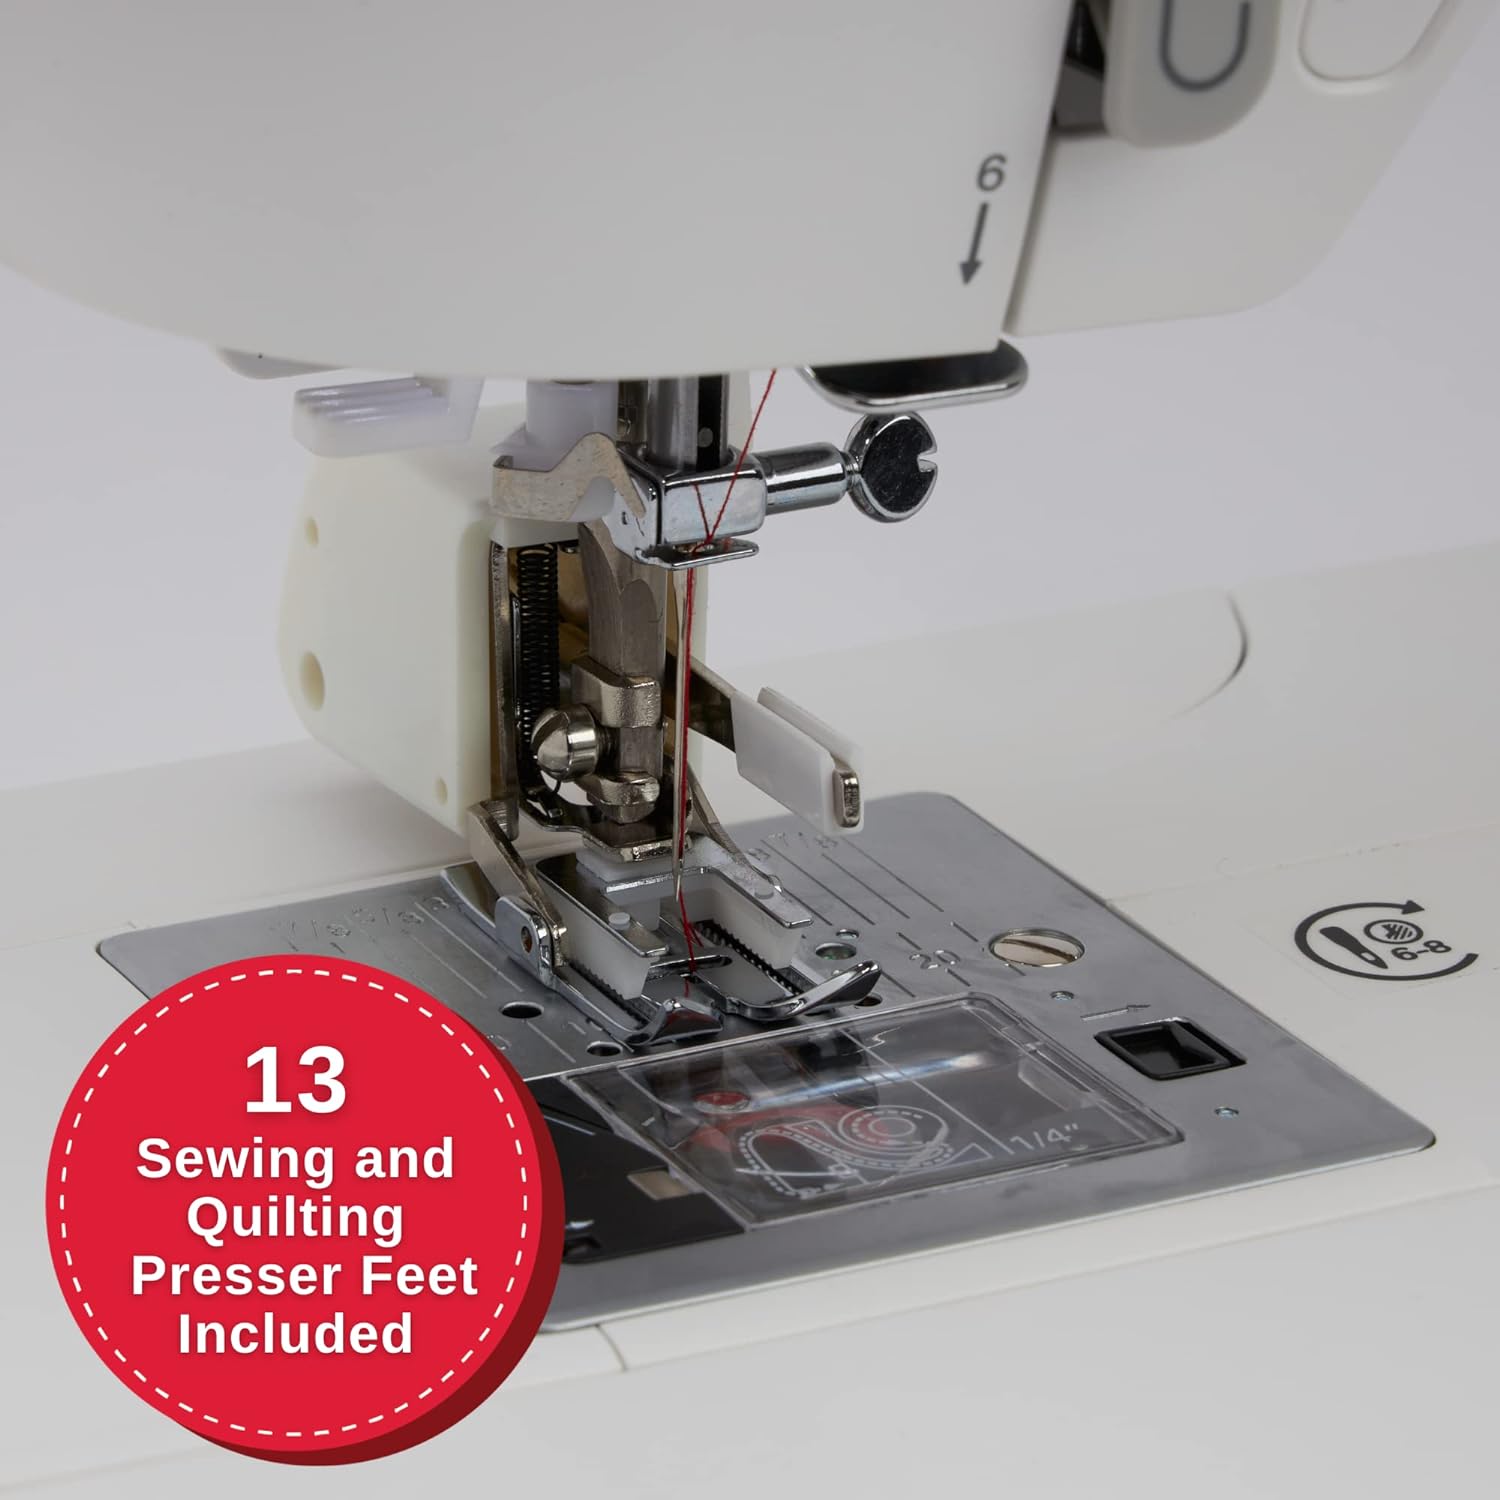 Best Embroidery and Quilting Sewing Machine